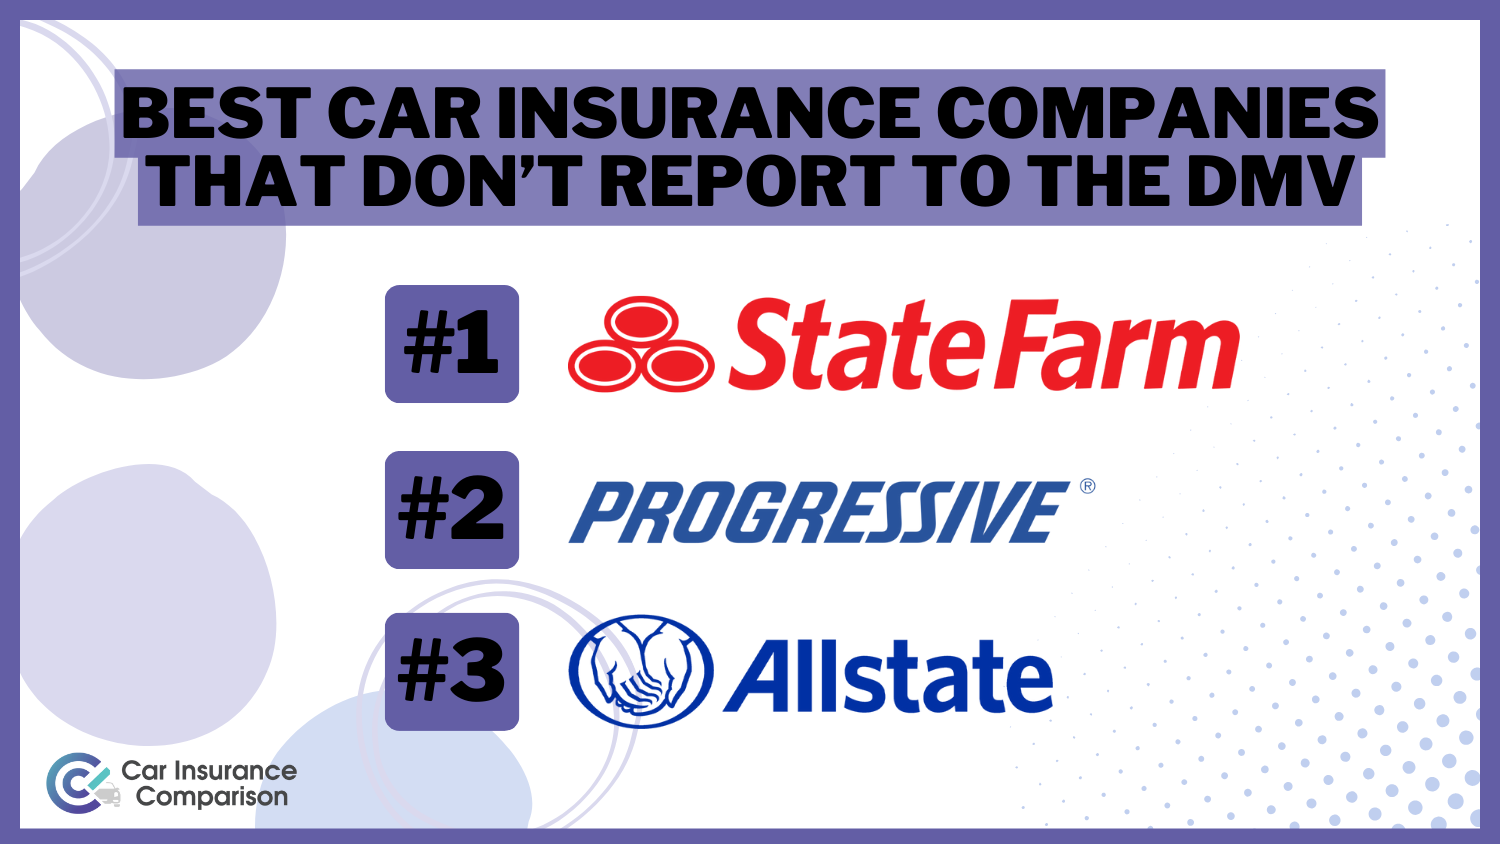 State Farm, Progressive, and Allstate: Best Car Insurance Companies That Don’t Report to the DMV